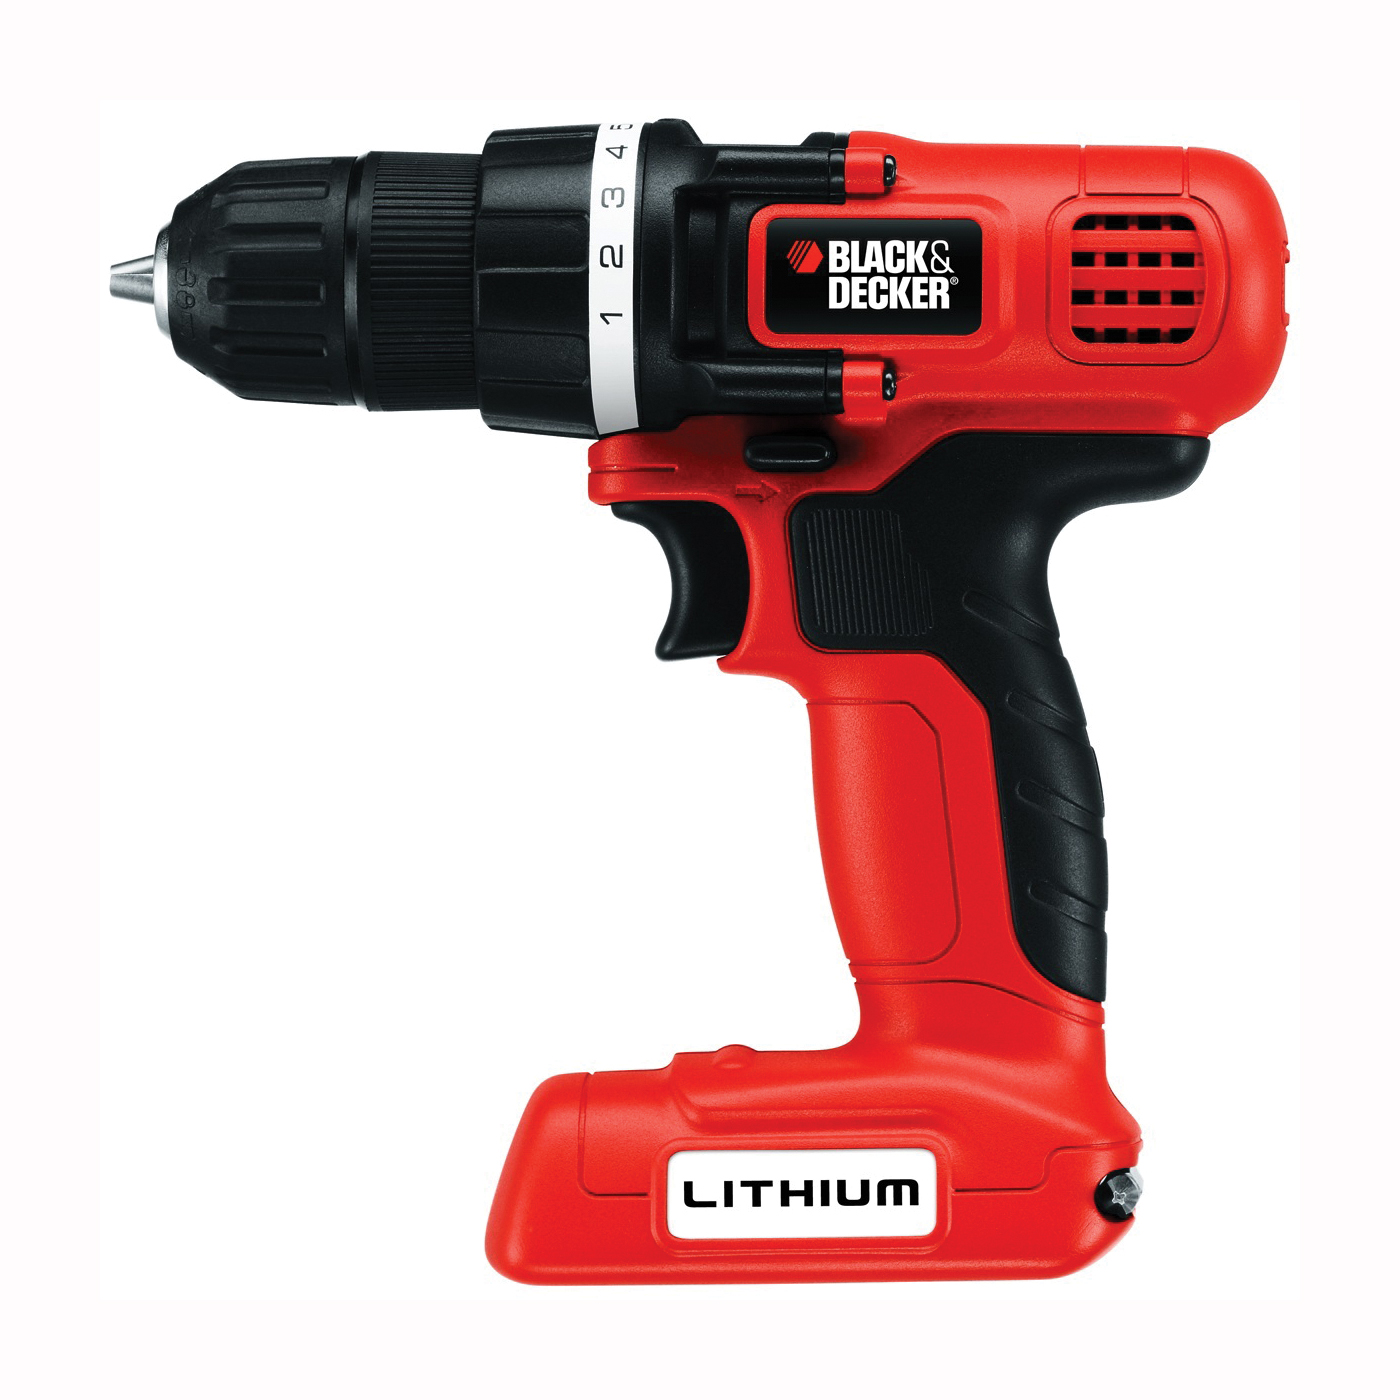 BDCD8C/LDX172C Drill/Driver, Battery Included, 7.2 V, 3/8 in Chuck, Keyless Chuck